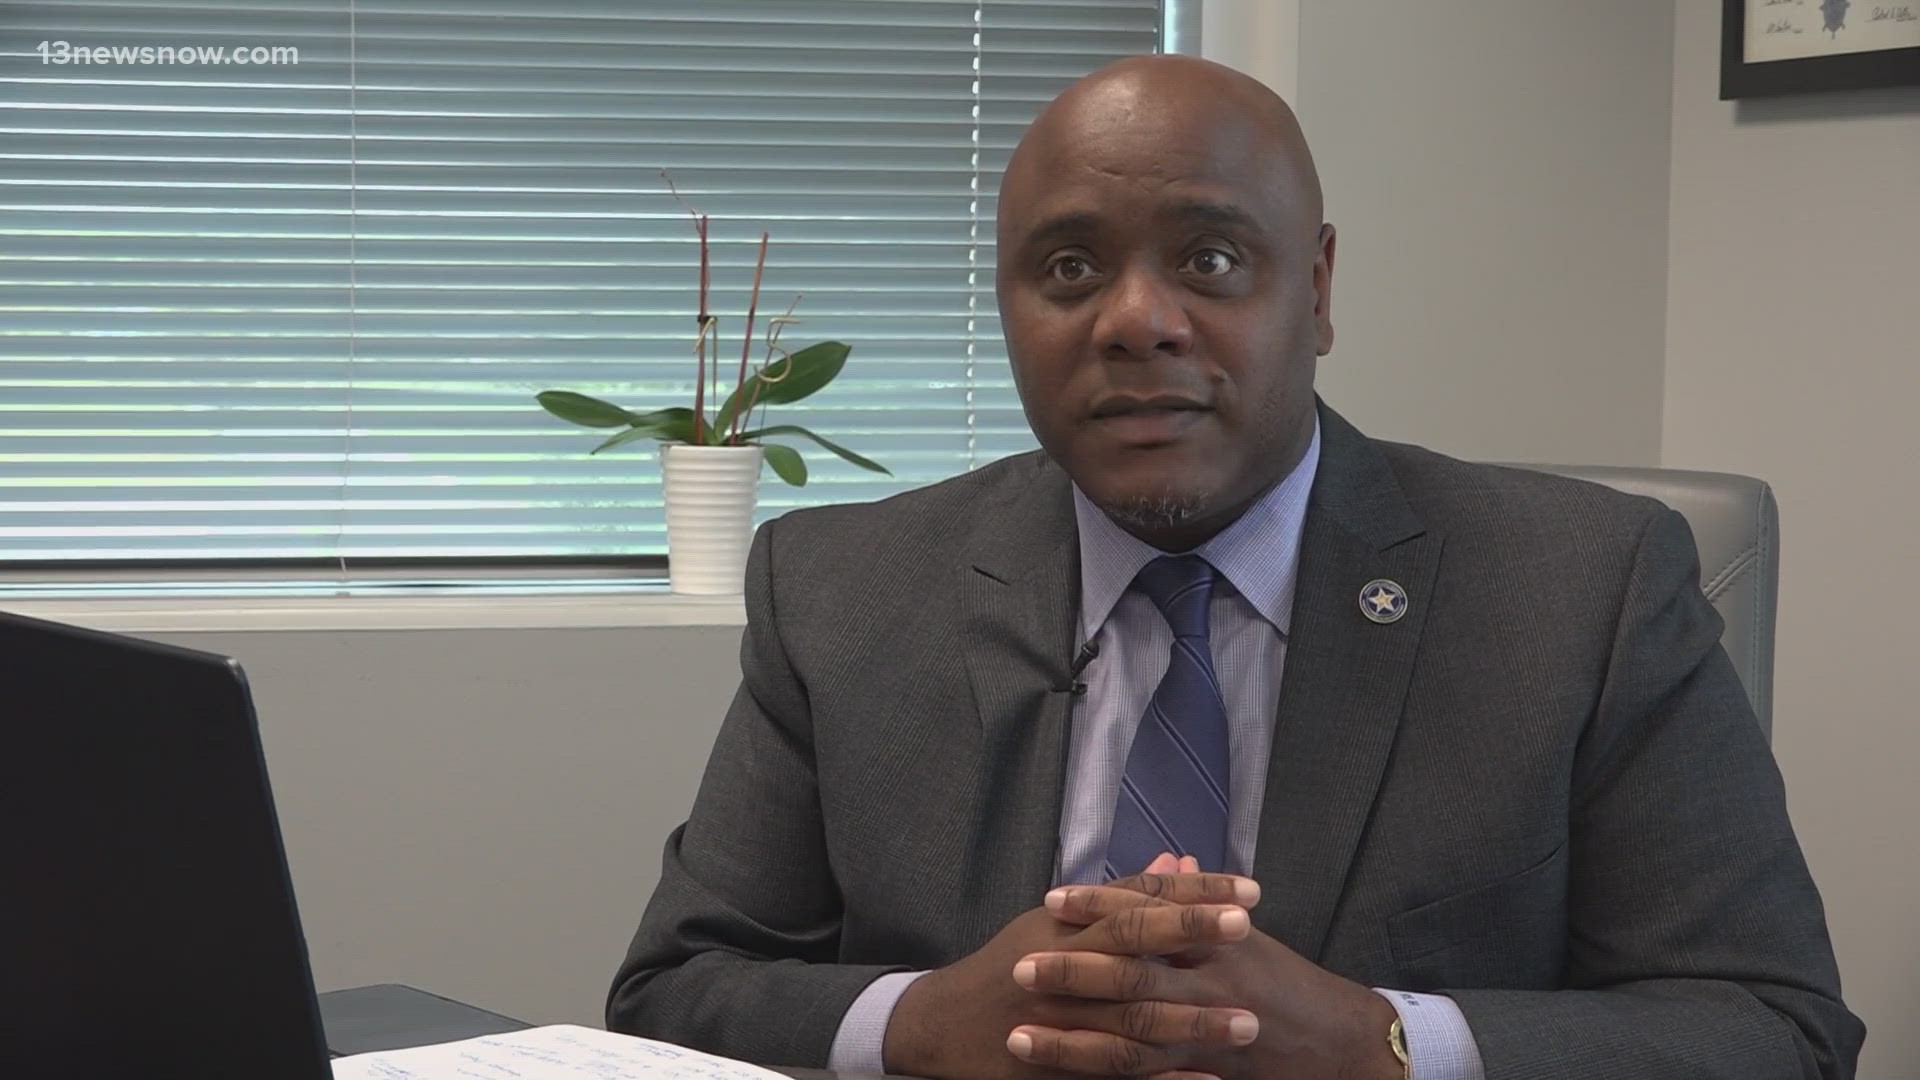 In a few weeks, Dr. Raymond Haynes will start his new role as superintendent.